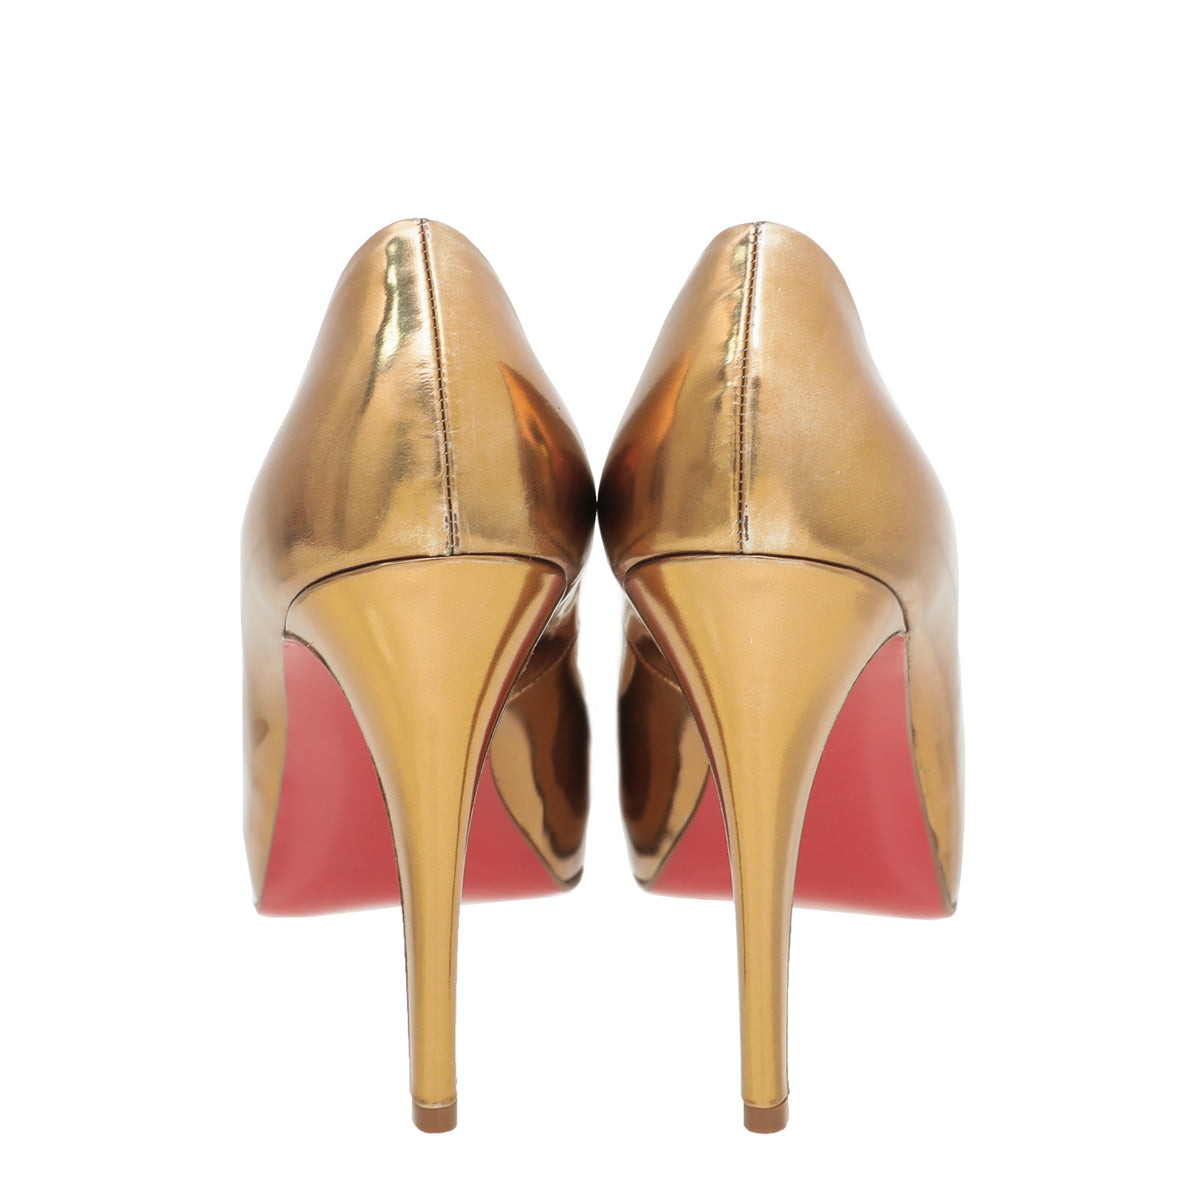 Christian Louboutin Gold Very Prive Crystal 120 Pumps 39.5